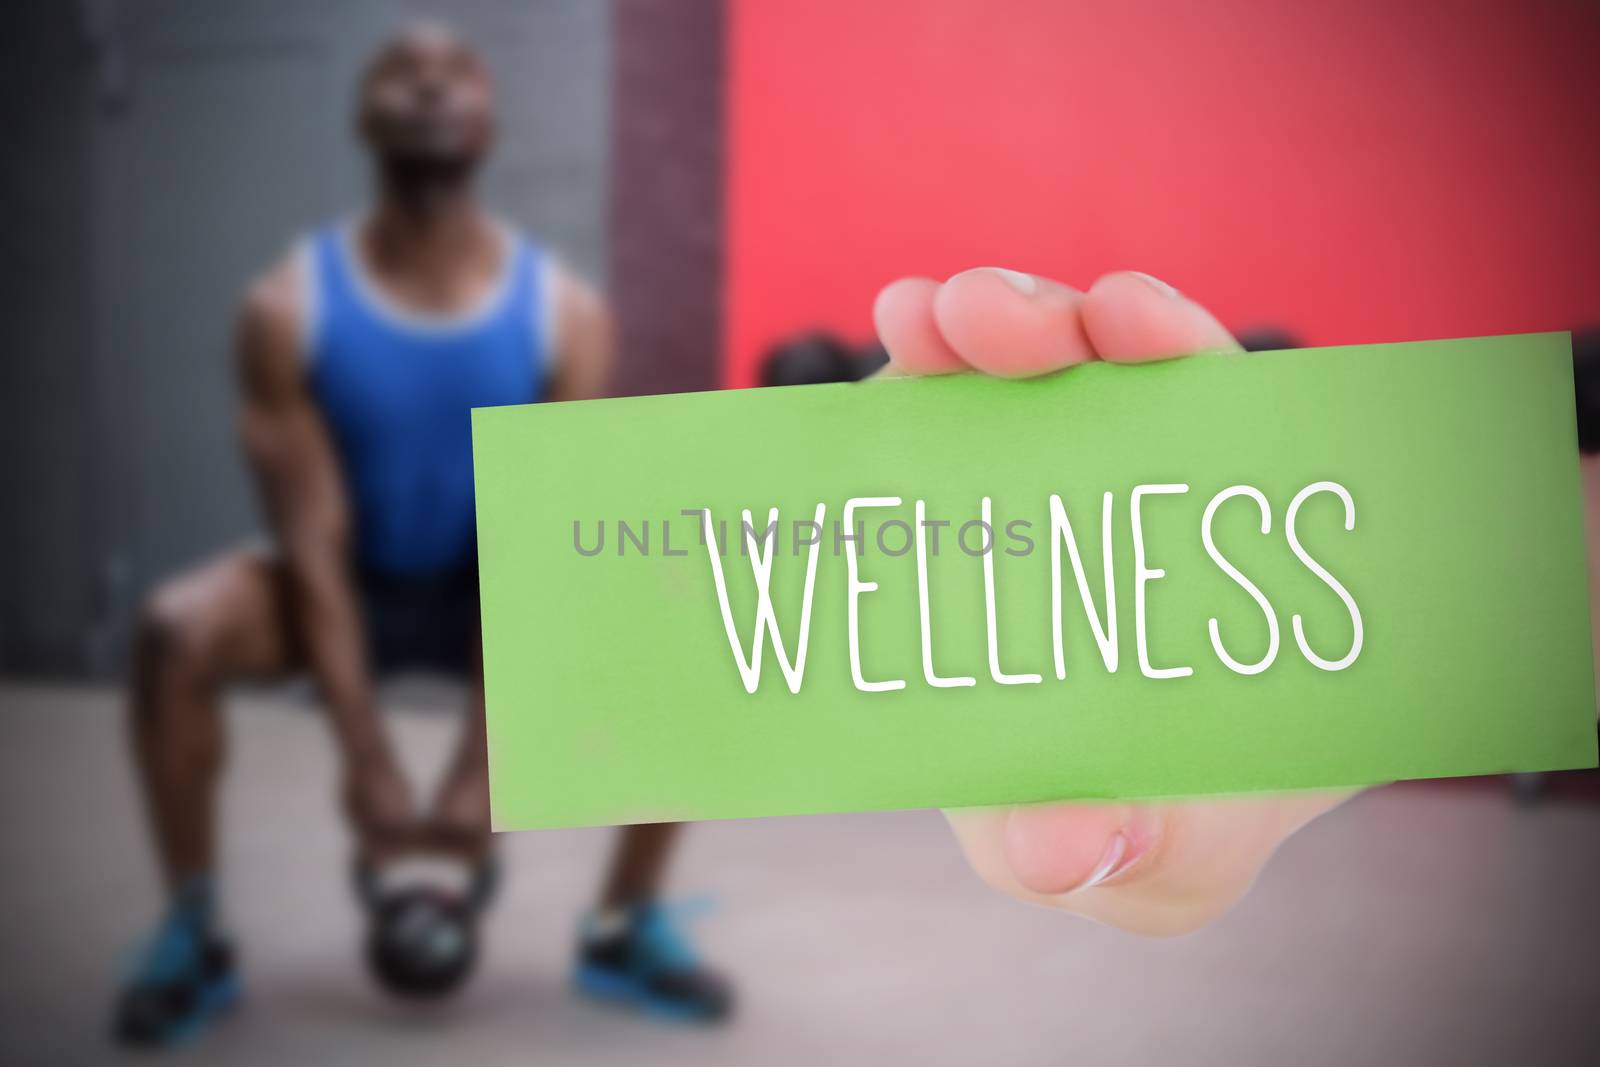 The word wellness and hand showing card against 